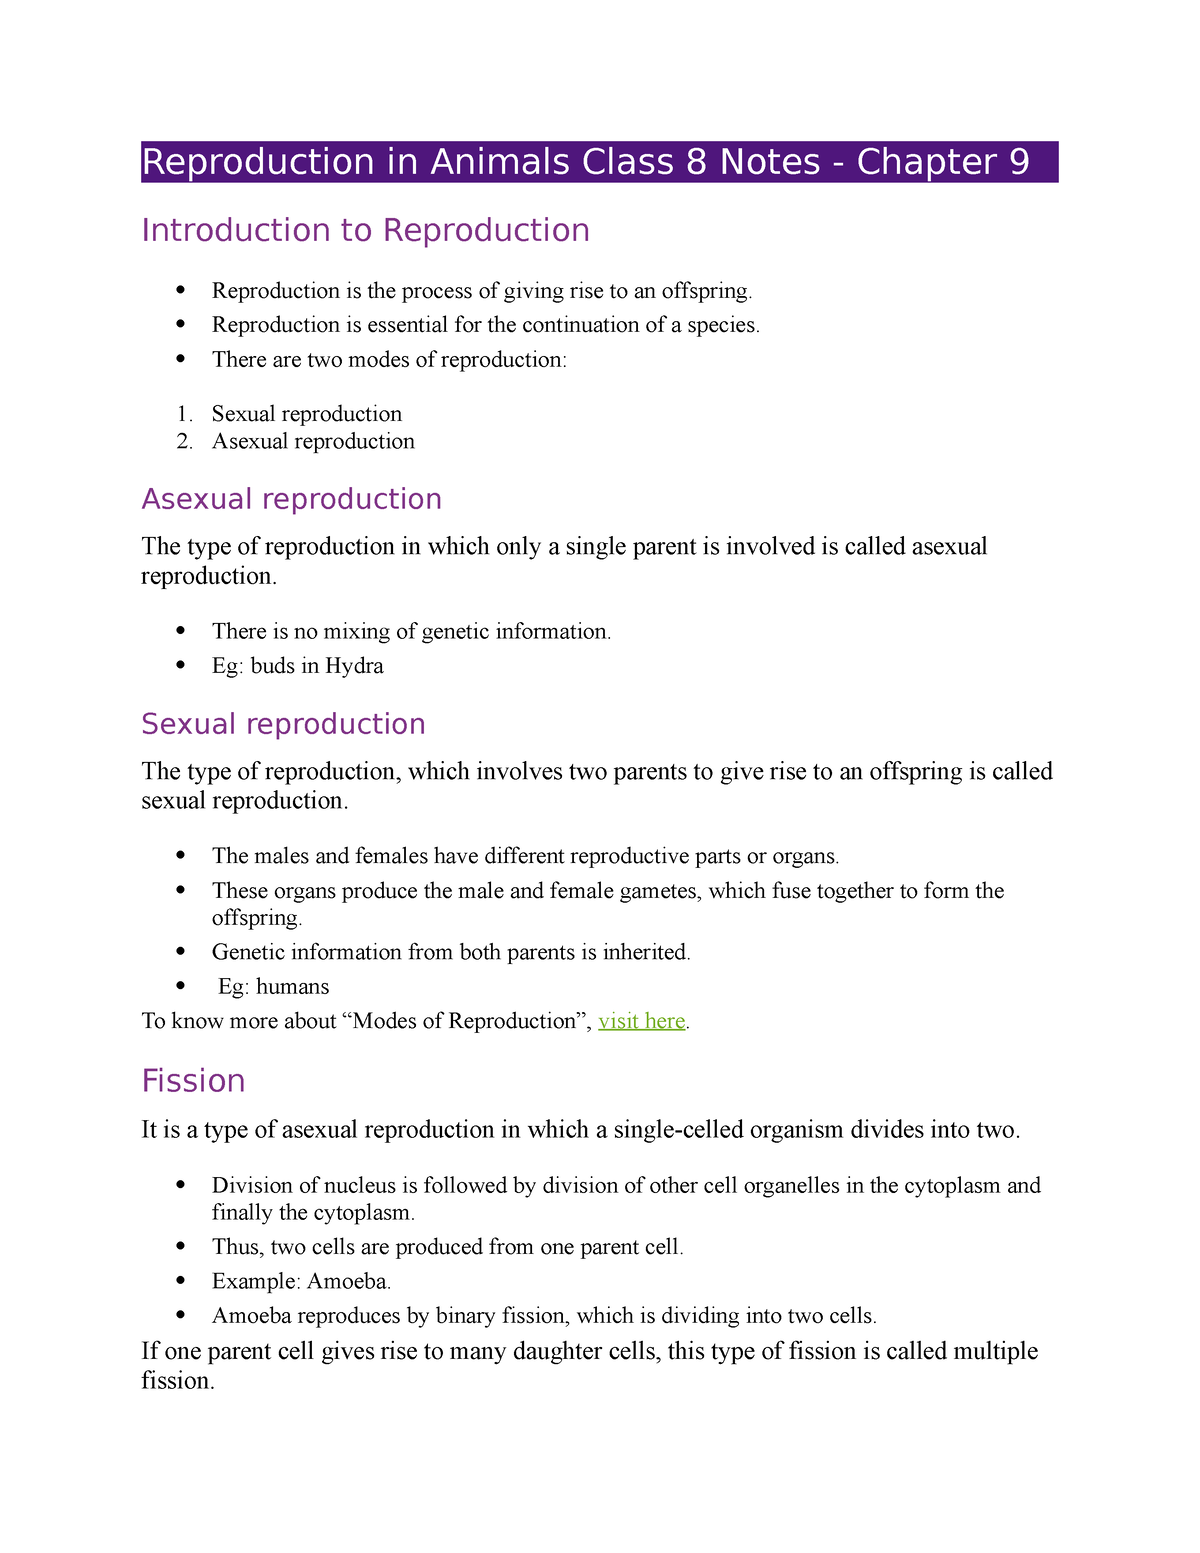 Reproduction in Animals Class 8 Notes -  Reproduction is essential for the  continuation of a - Studocu